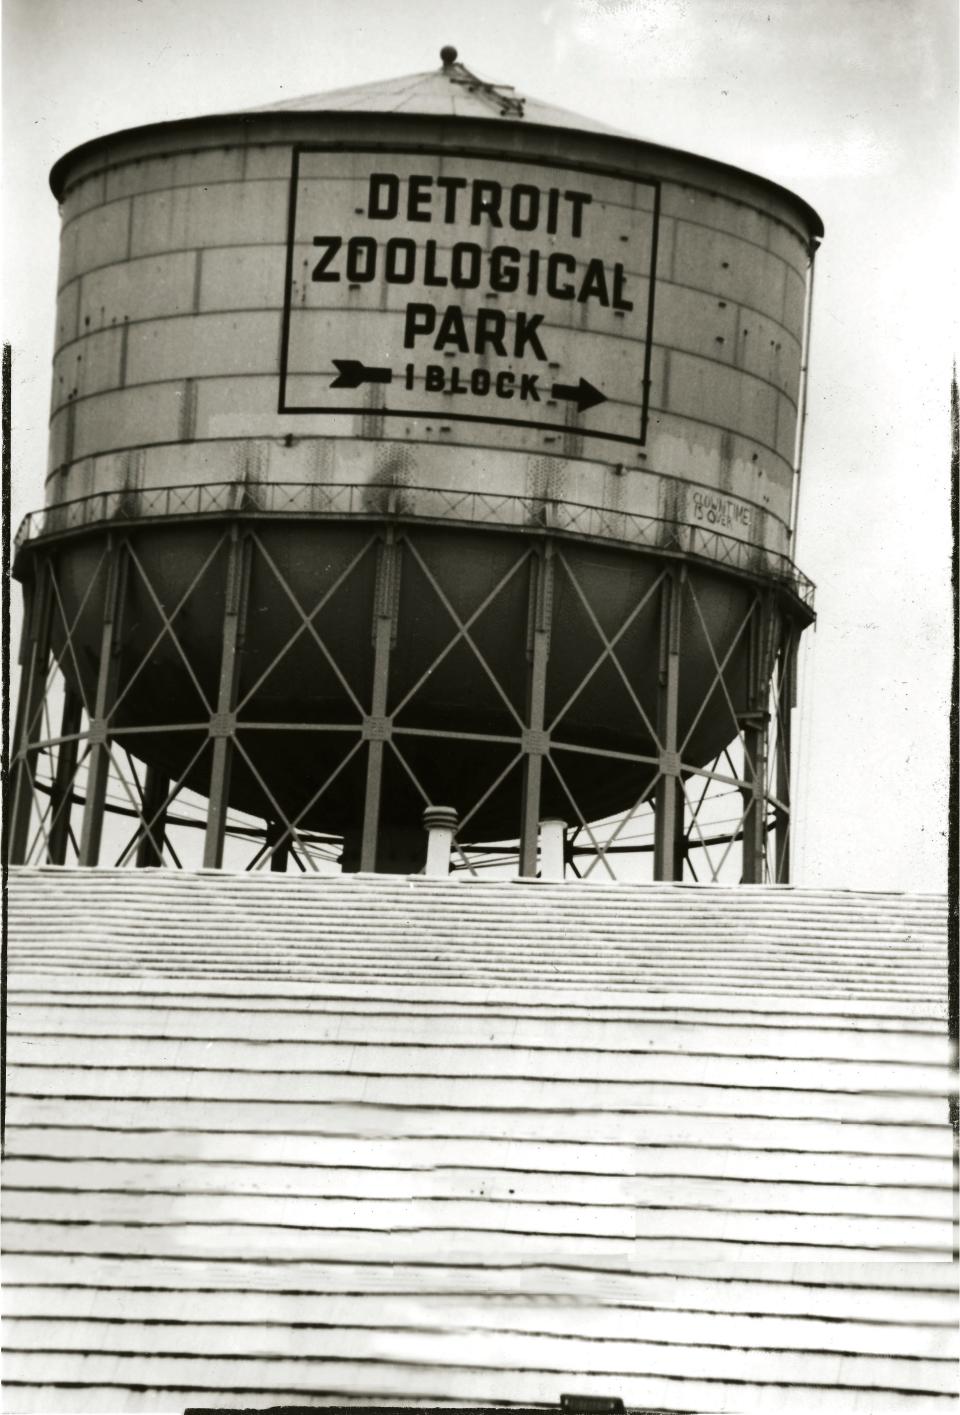 The water tower near the Detroit Zoo in 1985.